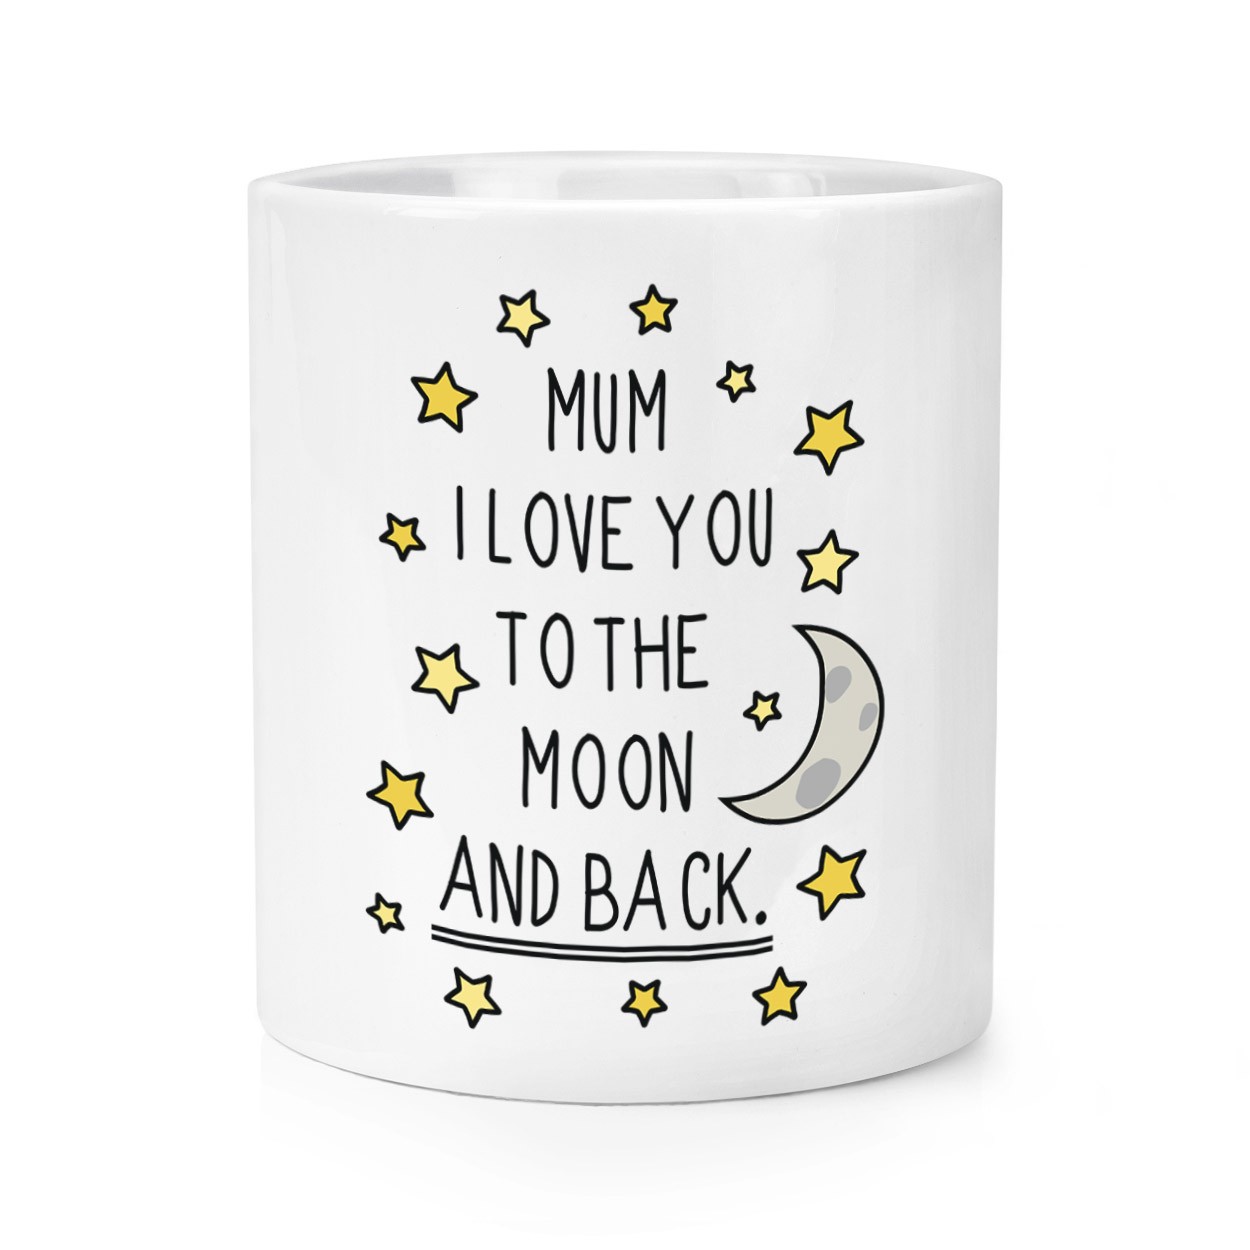 Mum I Love You To The Moon And Back Makeup Brush Pencil Pot